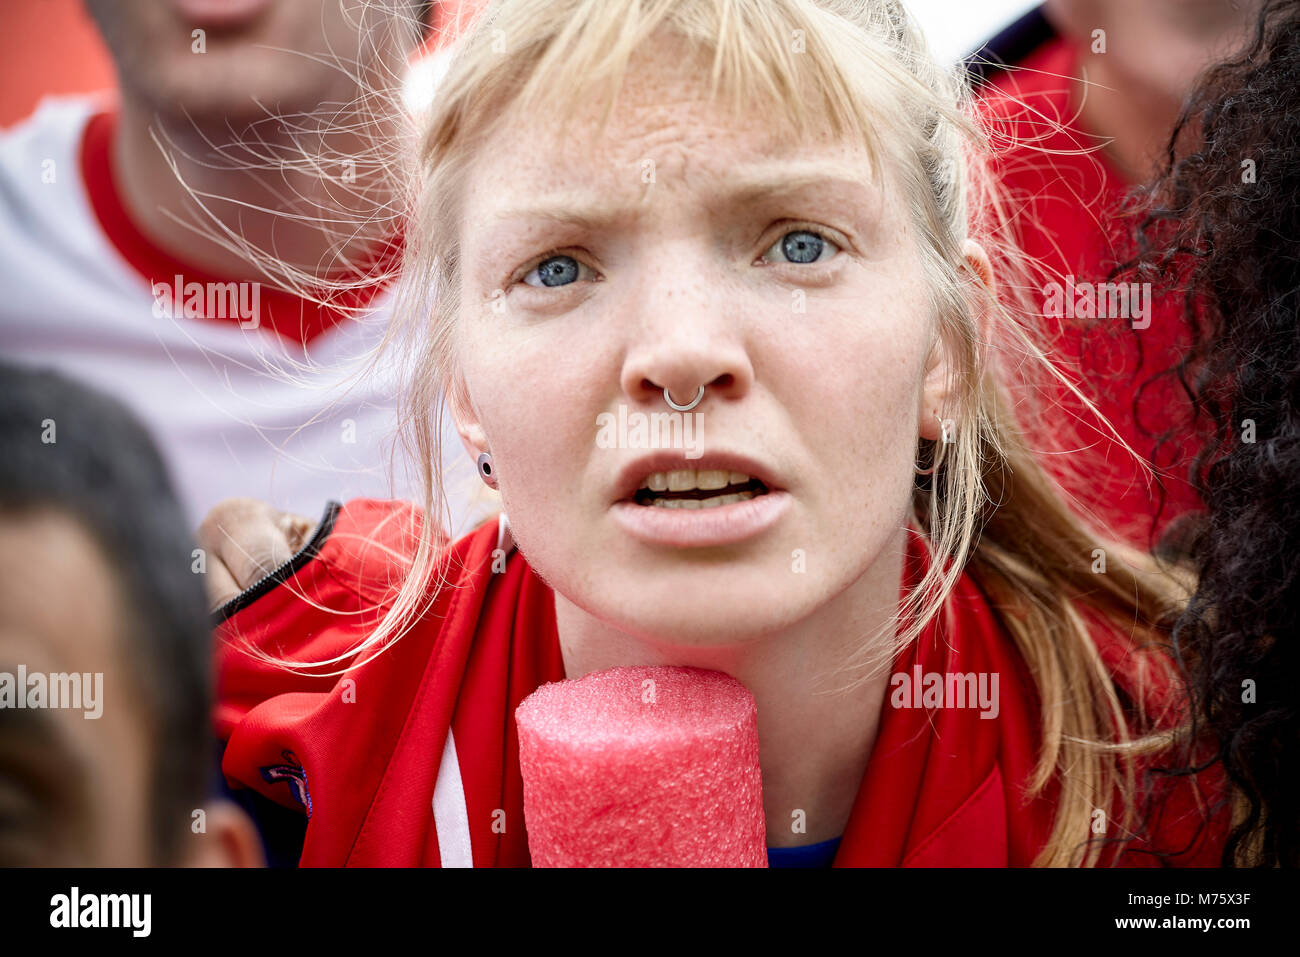 Woman watching football match with furrowed brow, portrait Stock Photo